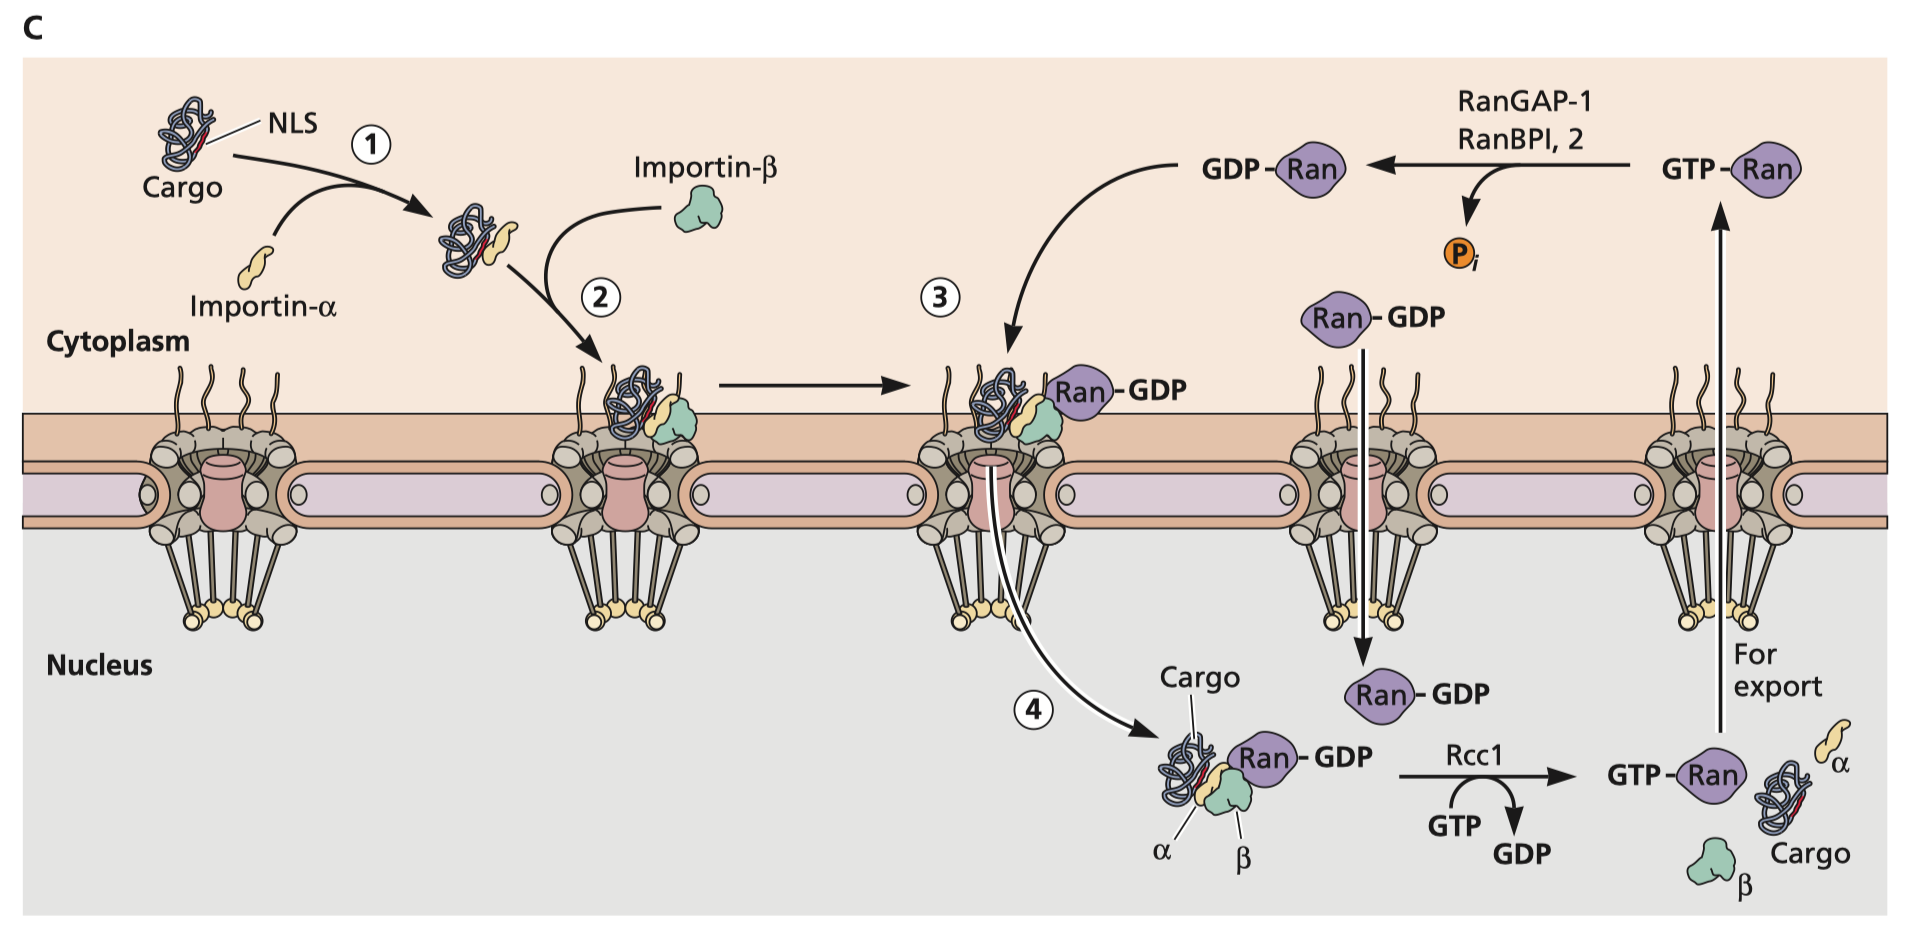 Flint S, Racaniello V, Rall G, Skalka A, Enquist L. Principles of virology. Washington, DC: ASM Press; 2015. Figure 5.23C which shows the nuclear import cycle with influenza ribonucleoproteins as an example. Nucleear localization signals are recognized by importin-α which then recruits importin-β which recruits a small GTPase called Ran. When binding GDP, Ran is able to transport the RNP across the nuclear pore complex. The complex of importins and Ran will then dissociate, and a guanine nucleotide exchange factor will exchange GDP for GTP, that allows Ran-GTP to be exported out of the nucleus. RanGAP-1 or RanBPI, 2 can then catalyze hydrolysis of GTP to GDP which allows Ran to bind another importin-β to initiate the import cycle once more.